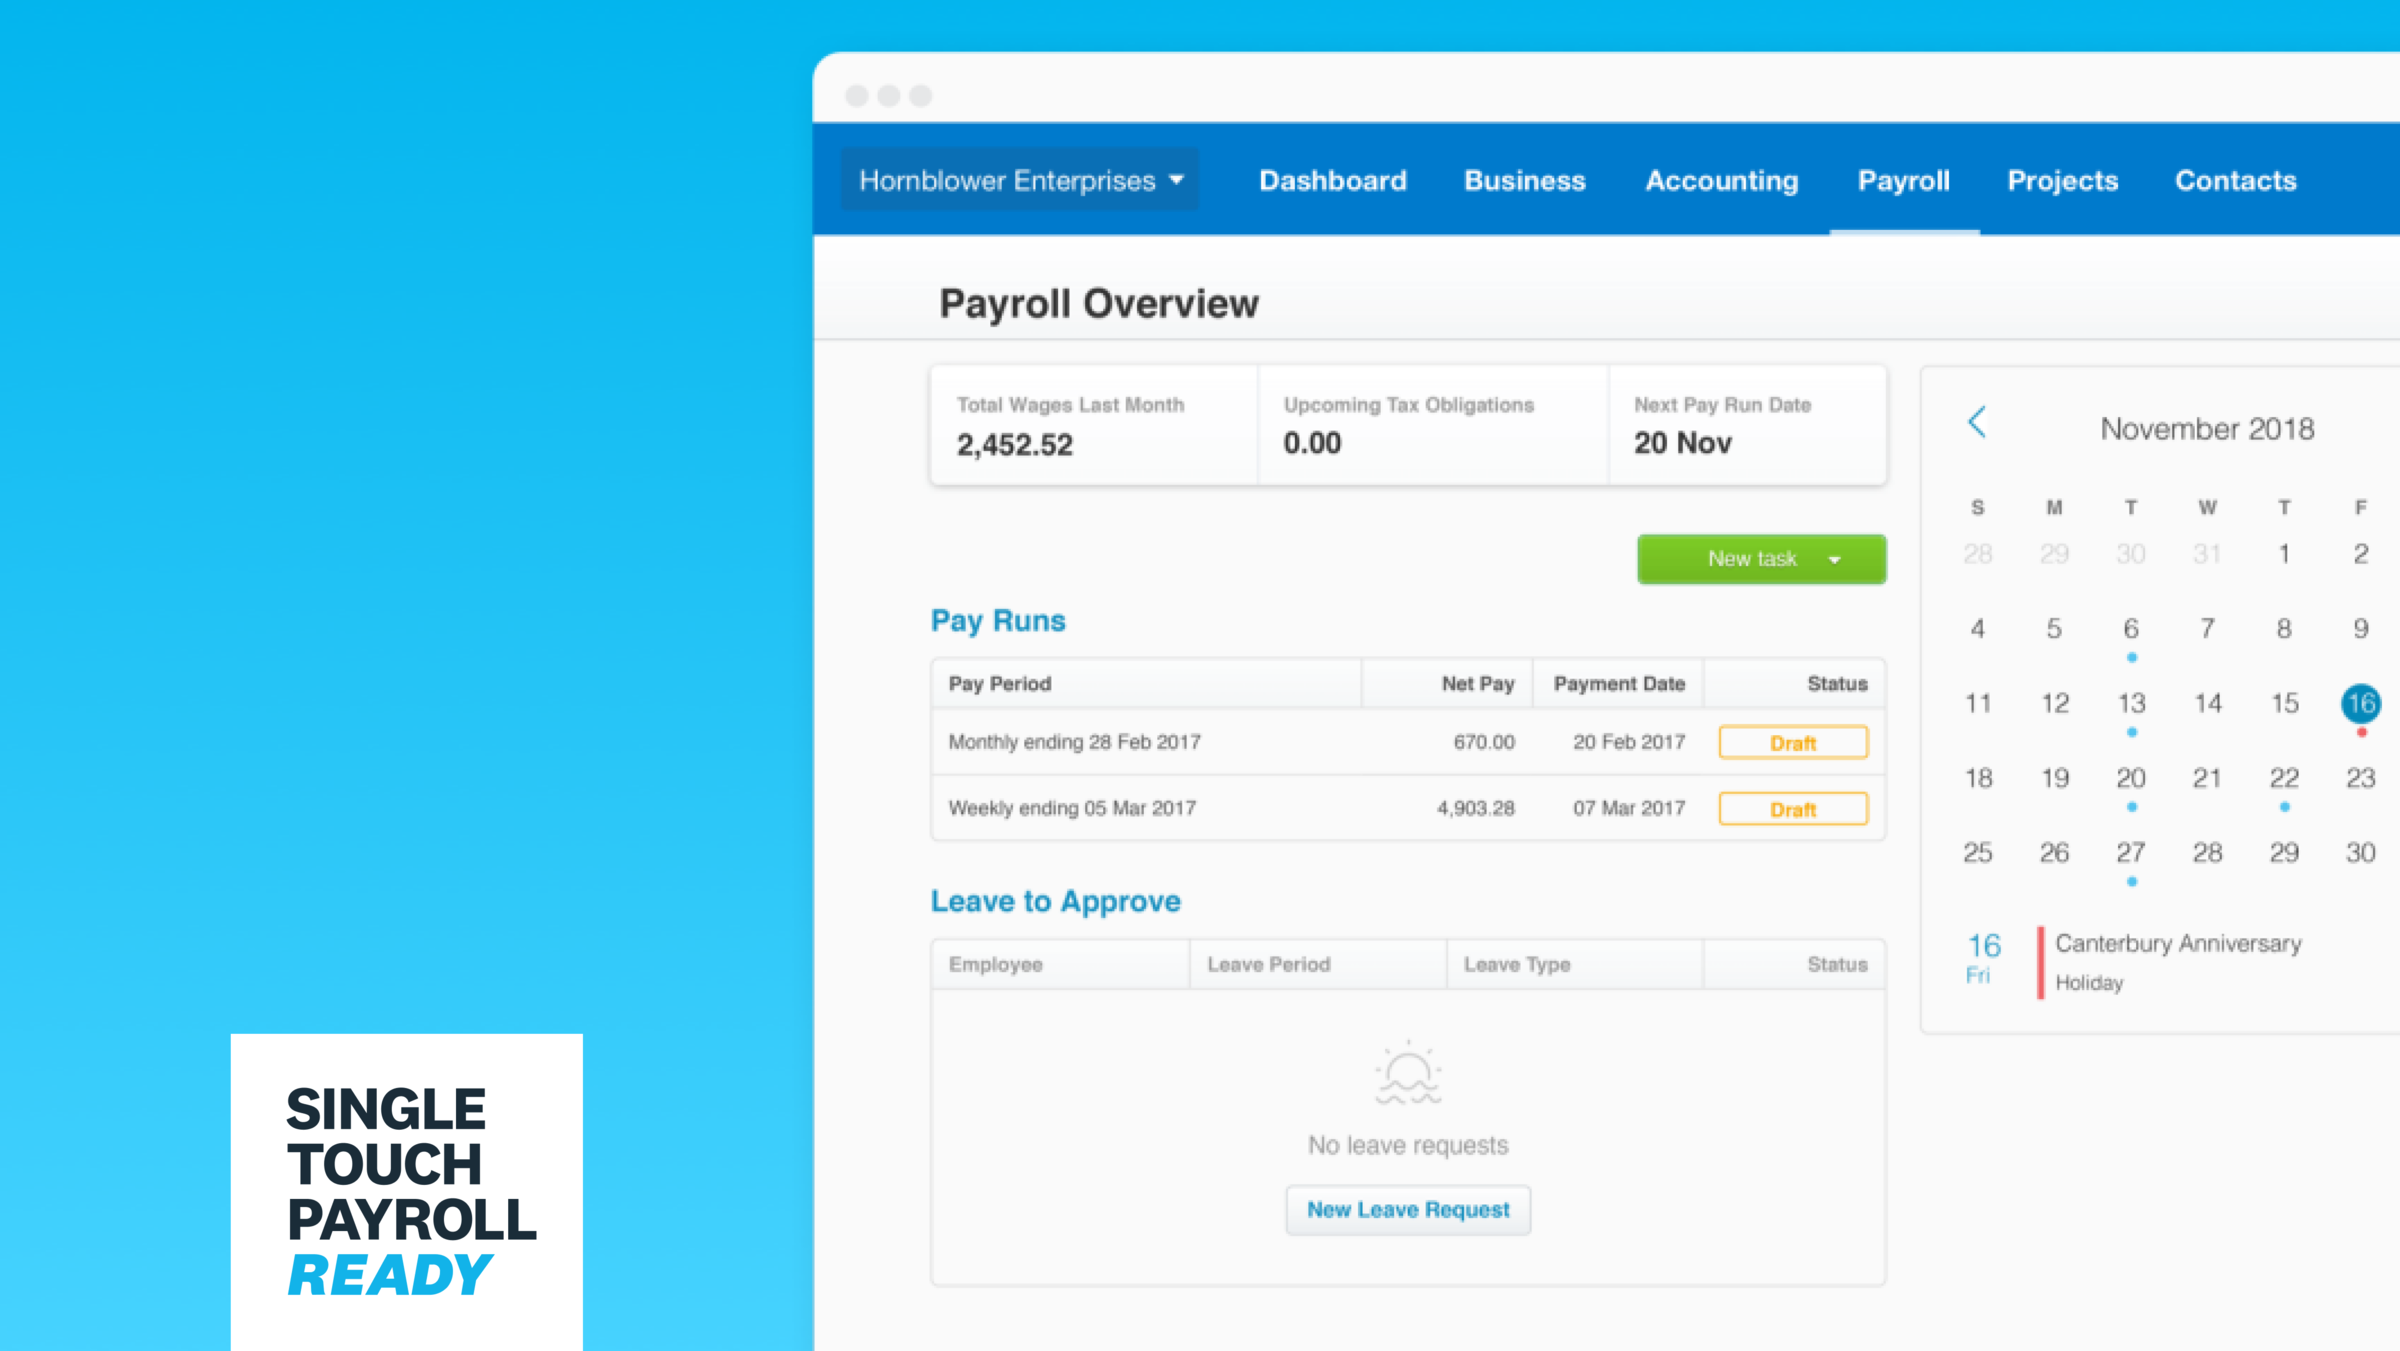 With Xero’s Payroll feature, you can do pay runs, approve staff leave and more, while also being Single Touch Payroll ready.